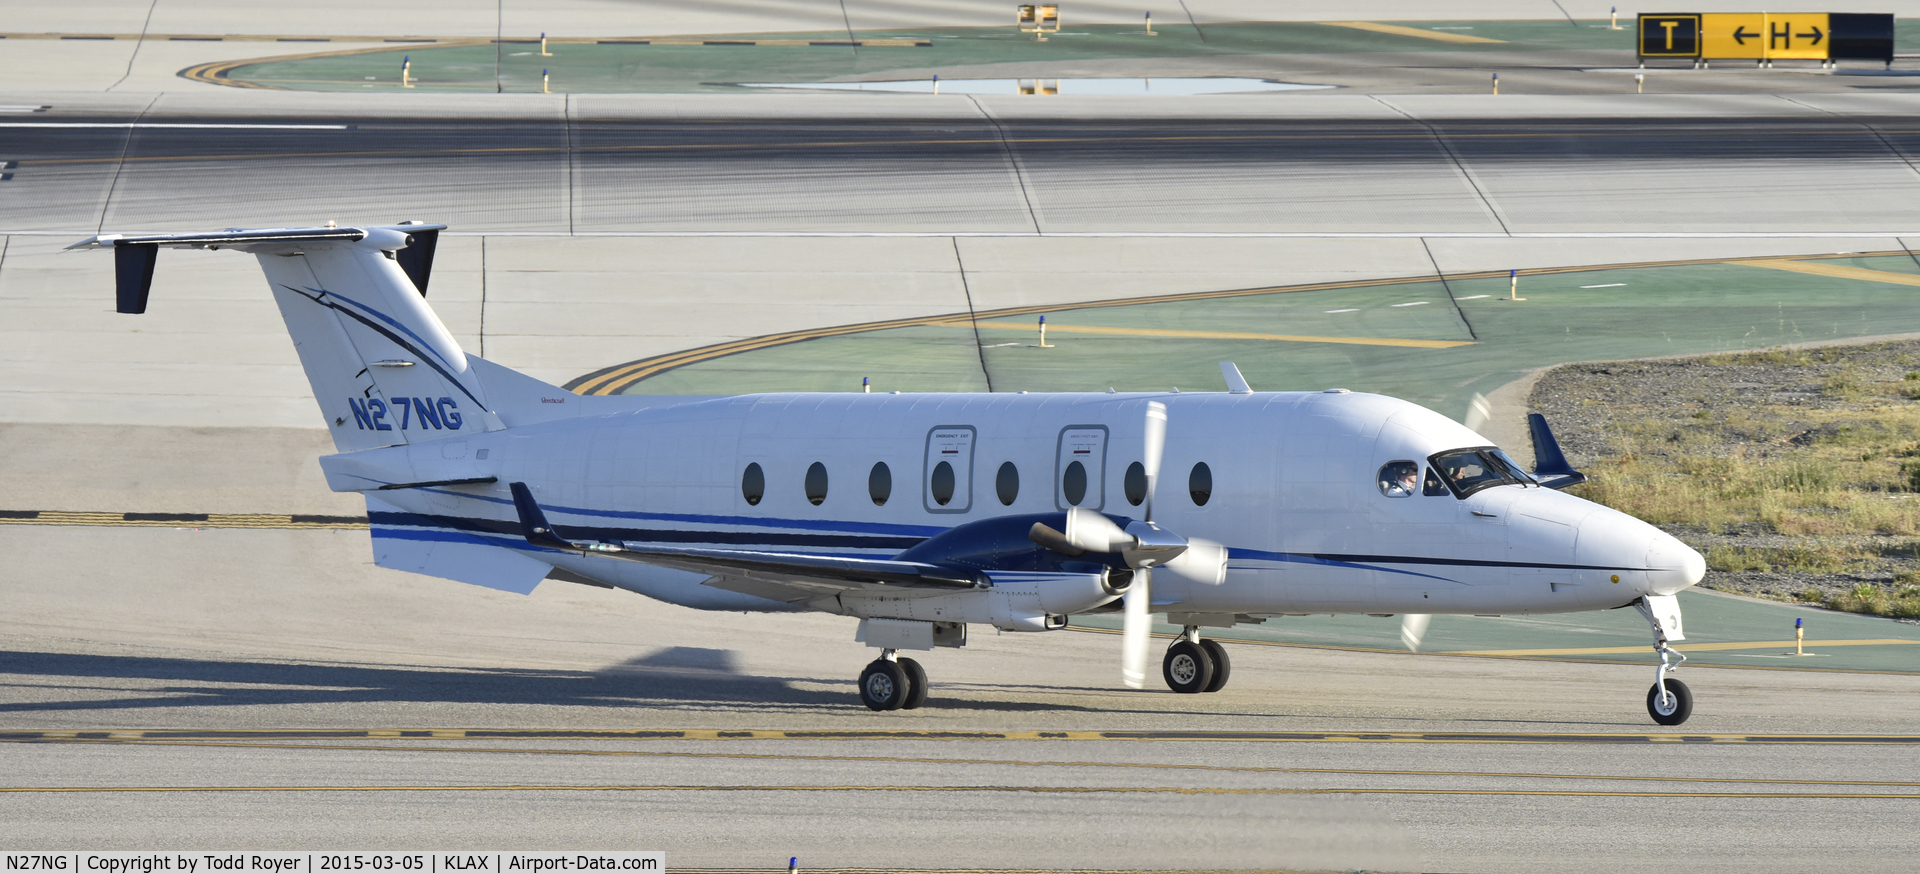 N27NG, 1999 Beech 1900D C/N UE-382, Taxiing to parking at LAX